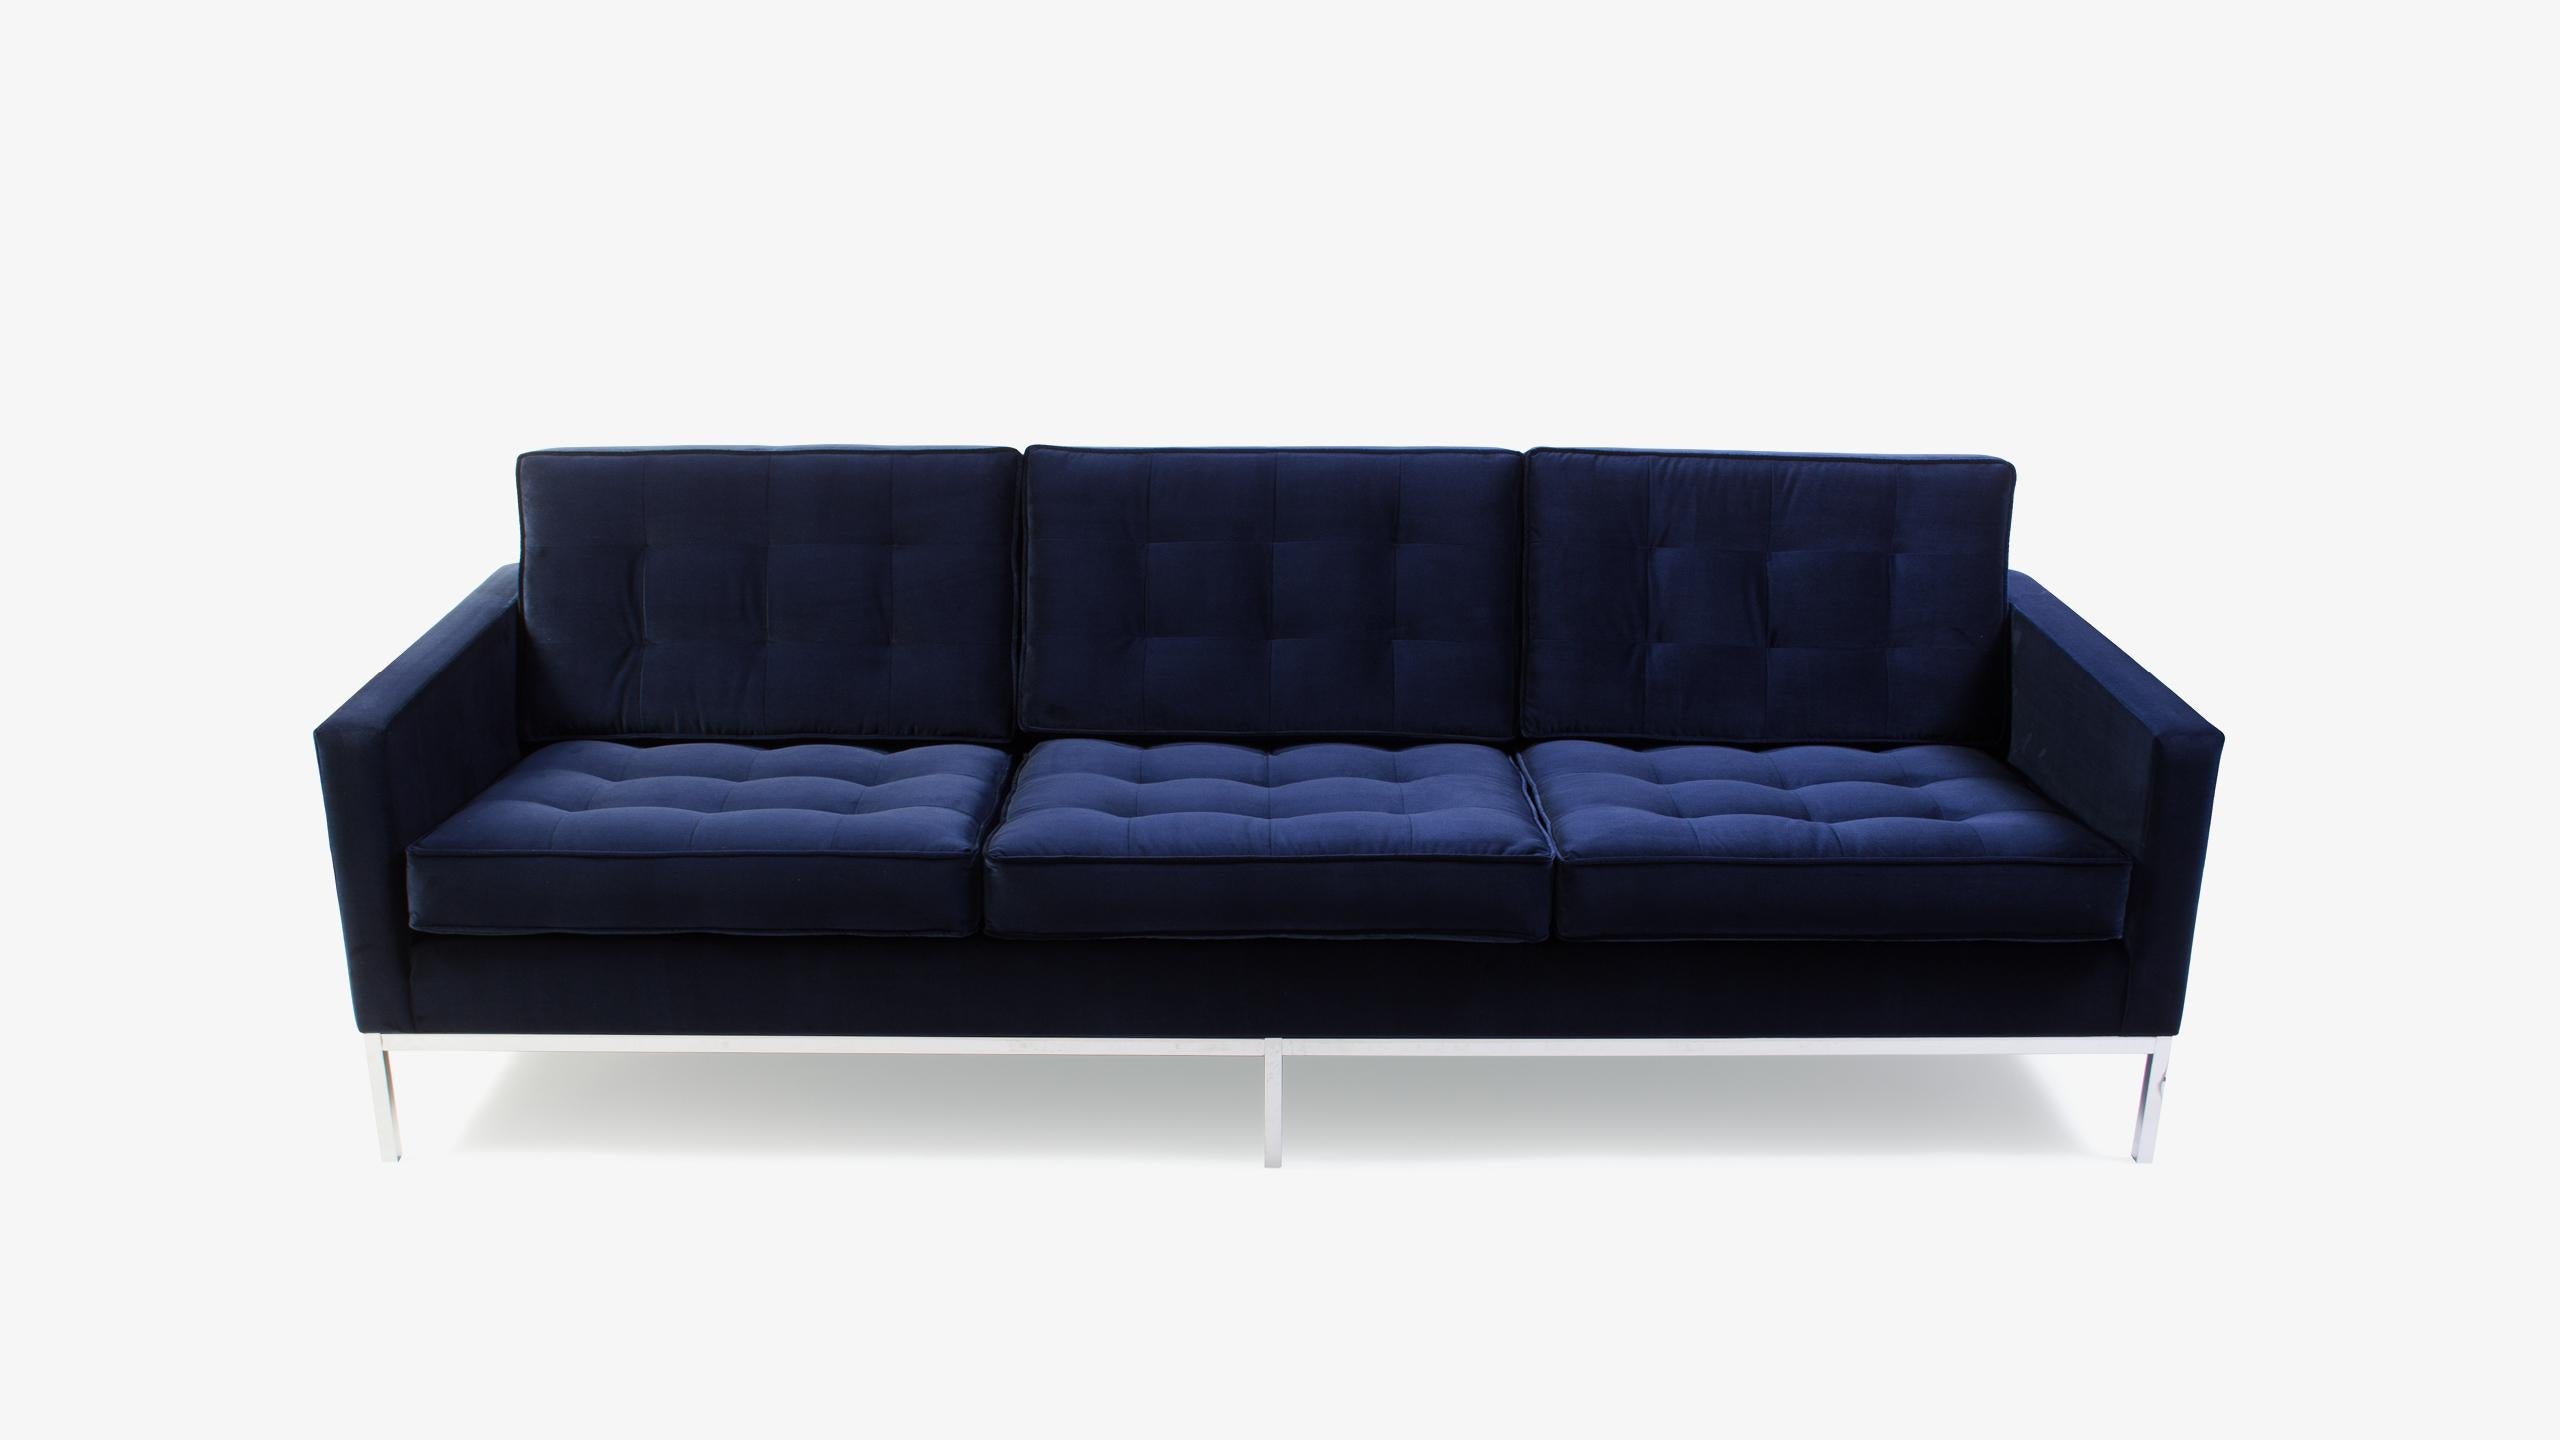 The Classic Florence Knoll sofa, completely restored and reupholstered in navy blue. We restored this piece based on original specifications. Using a high quality supple deep navy velvet, the piece has been brought back to life to live on for